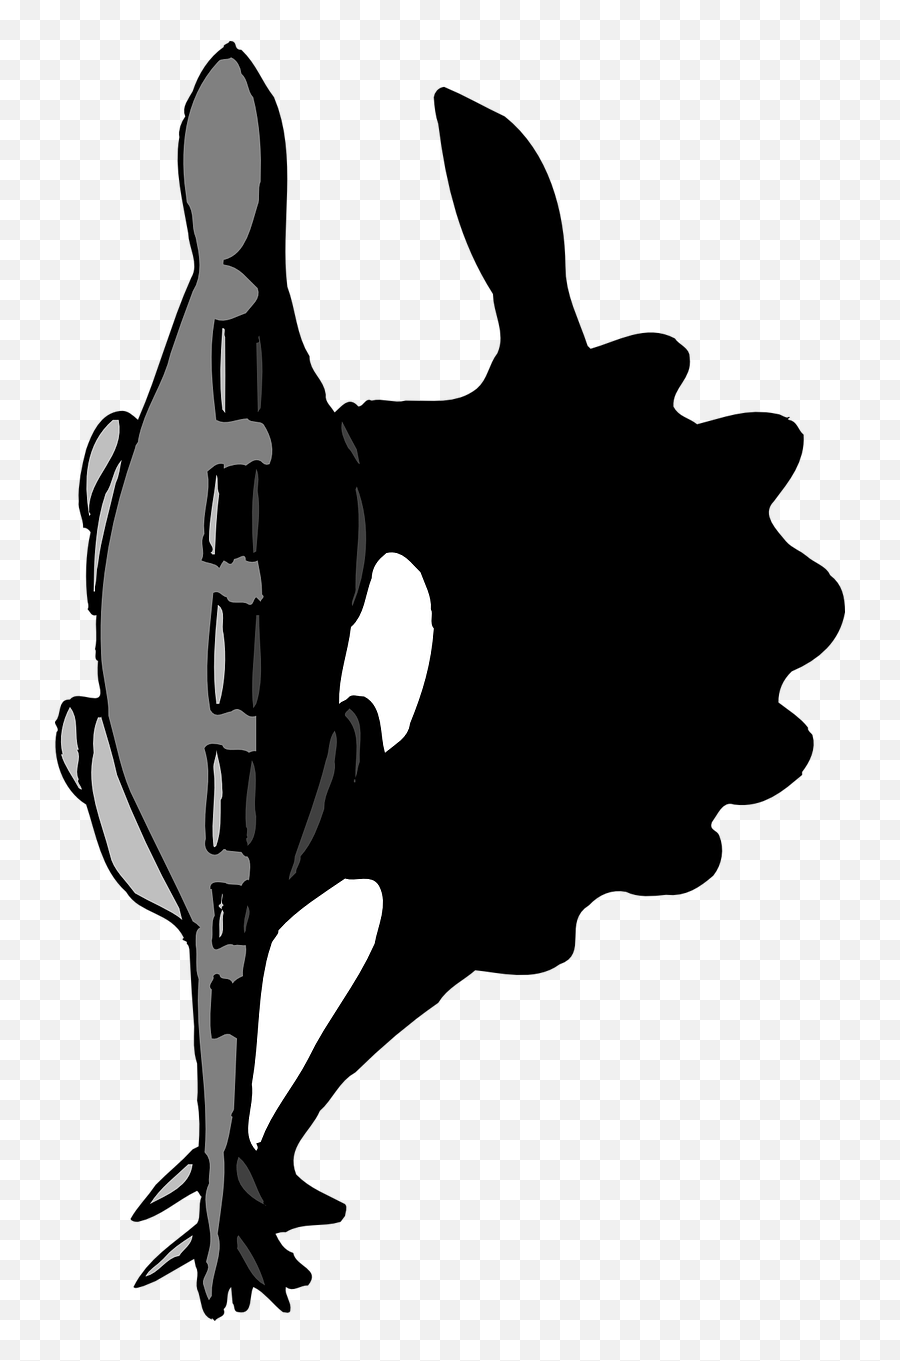 Top View Shadow - Free Vector Graphic On Pixabay Dinosaur Png Top View,Plant Top View Png